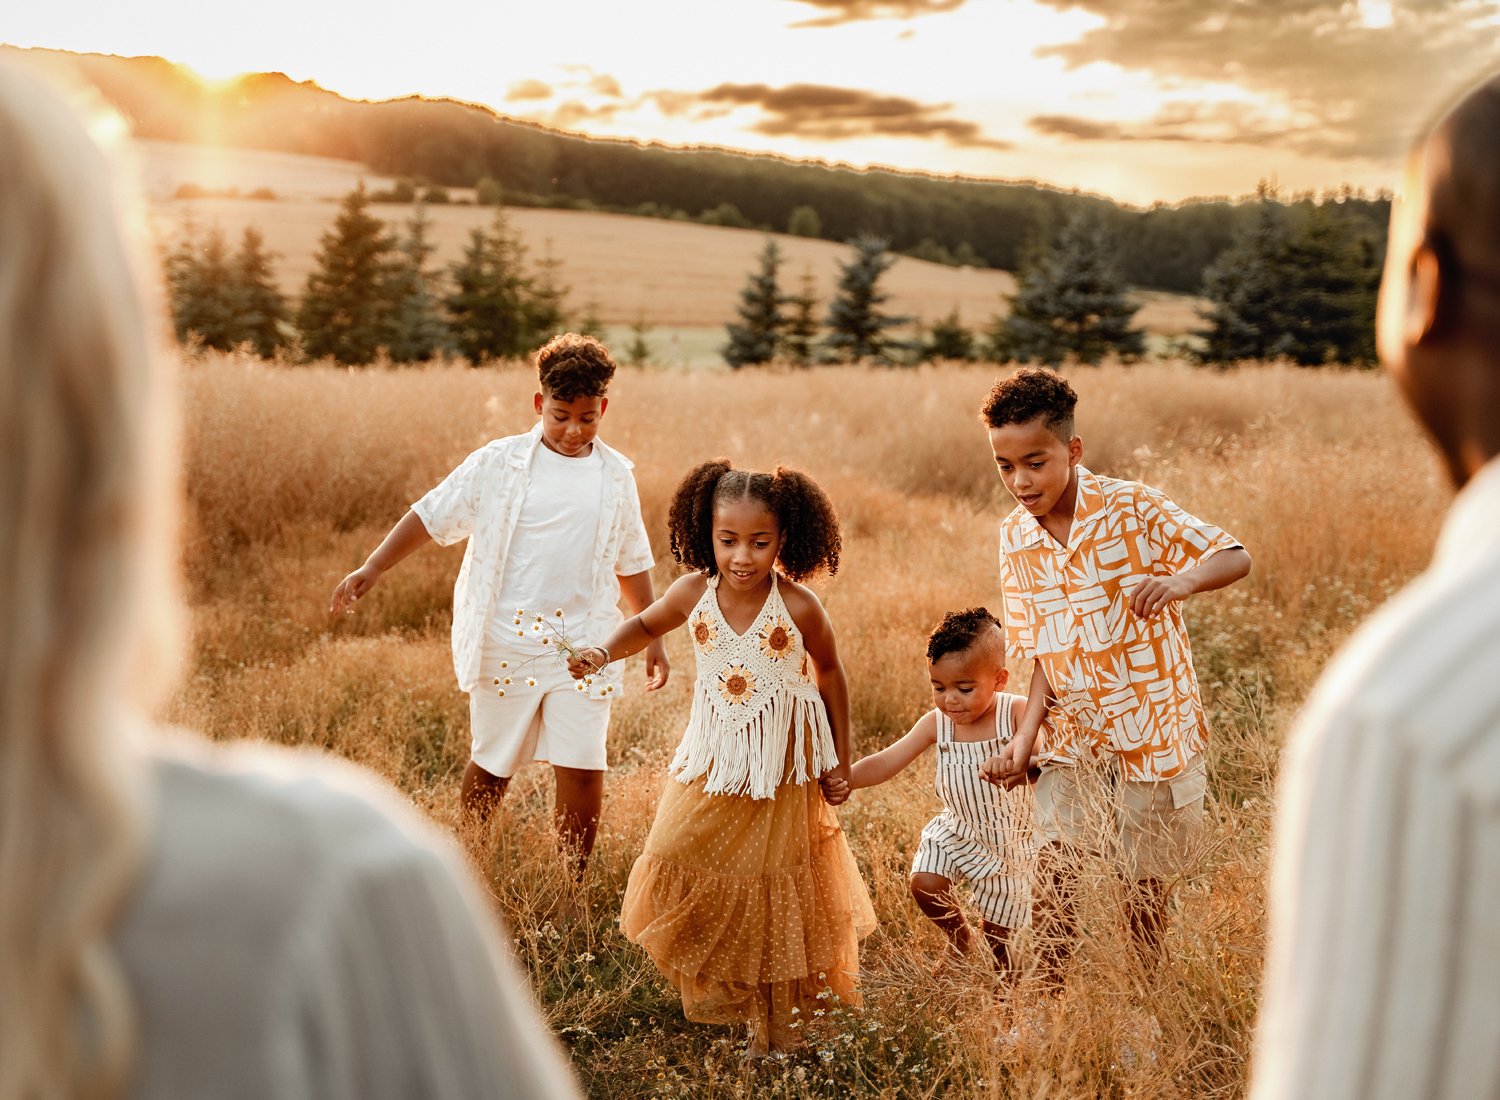 emotive-storytelling-summer-session-of-young-mixed-family-with-young-kids-at-sunset-in-german-country-side-in-ramstein-kmc-by-sarah-havens (5).jpg